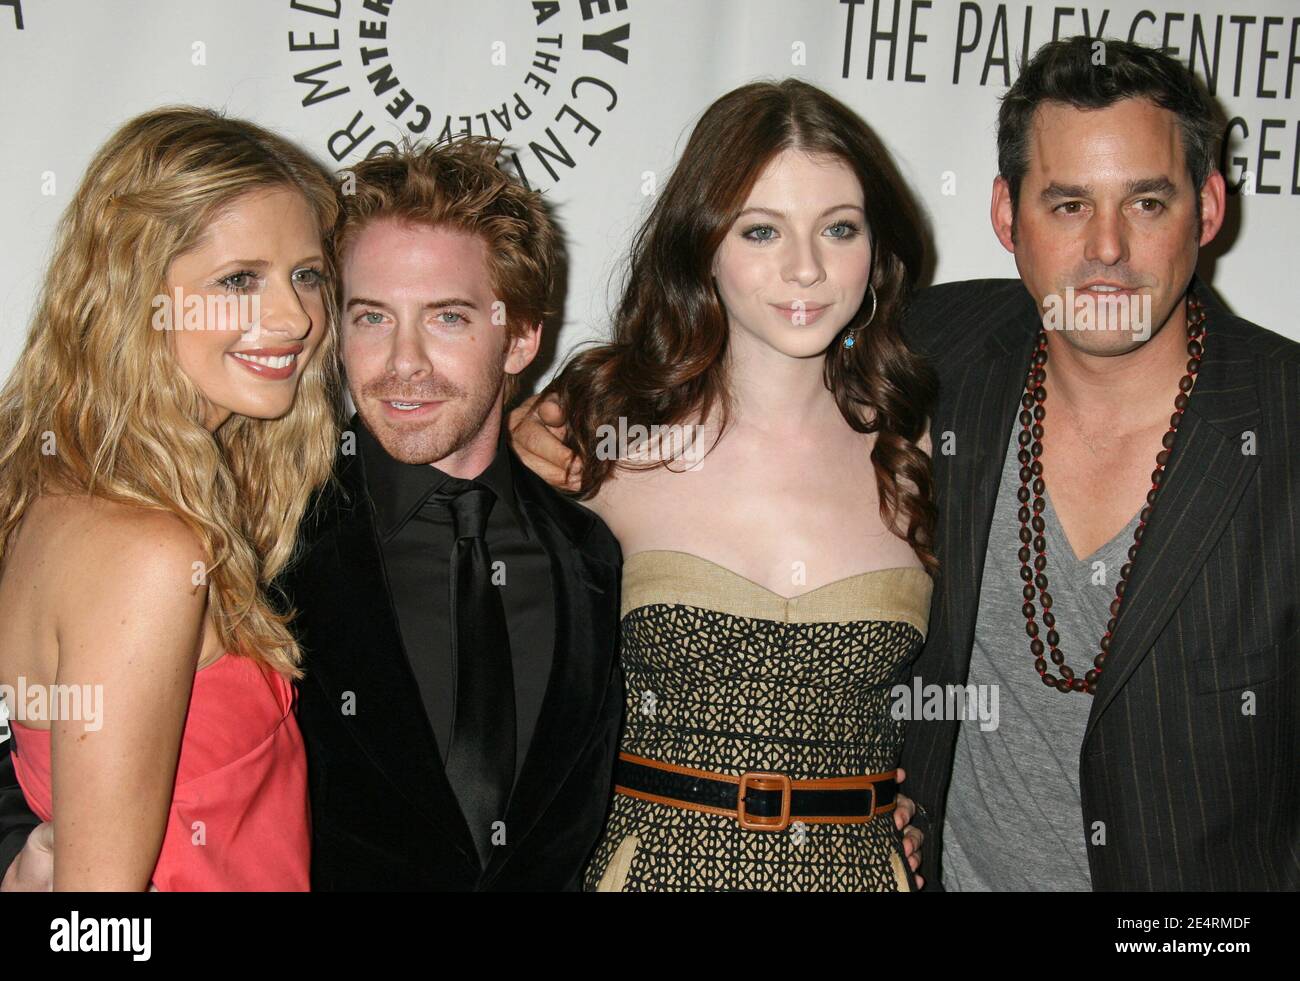 Sarah Michelle Gellar, Seth Green, Michelle Trachtenberg And Nicholas  Brendon Attend Buffy The Vampire Slayer Reunion, During The 25Th Annual  Paley Television Festival Held At The Archlight Theatre In Los Angeles, Ca,